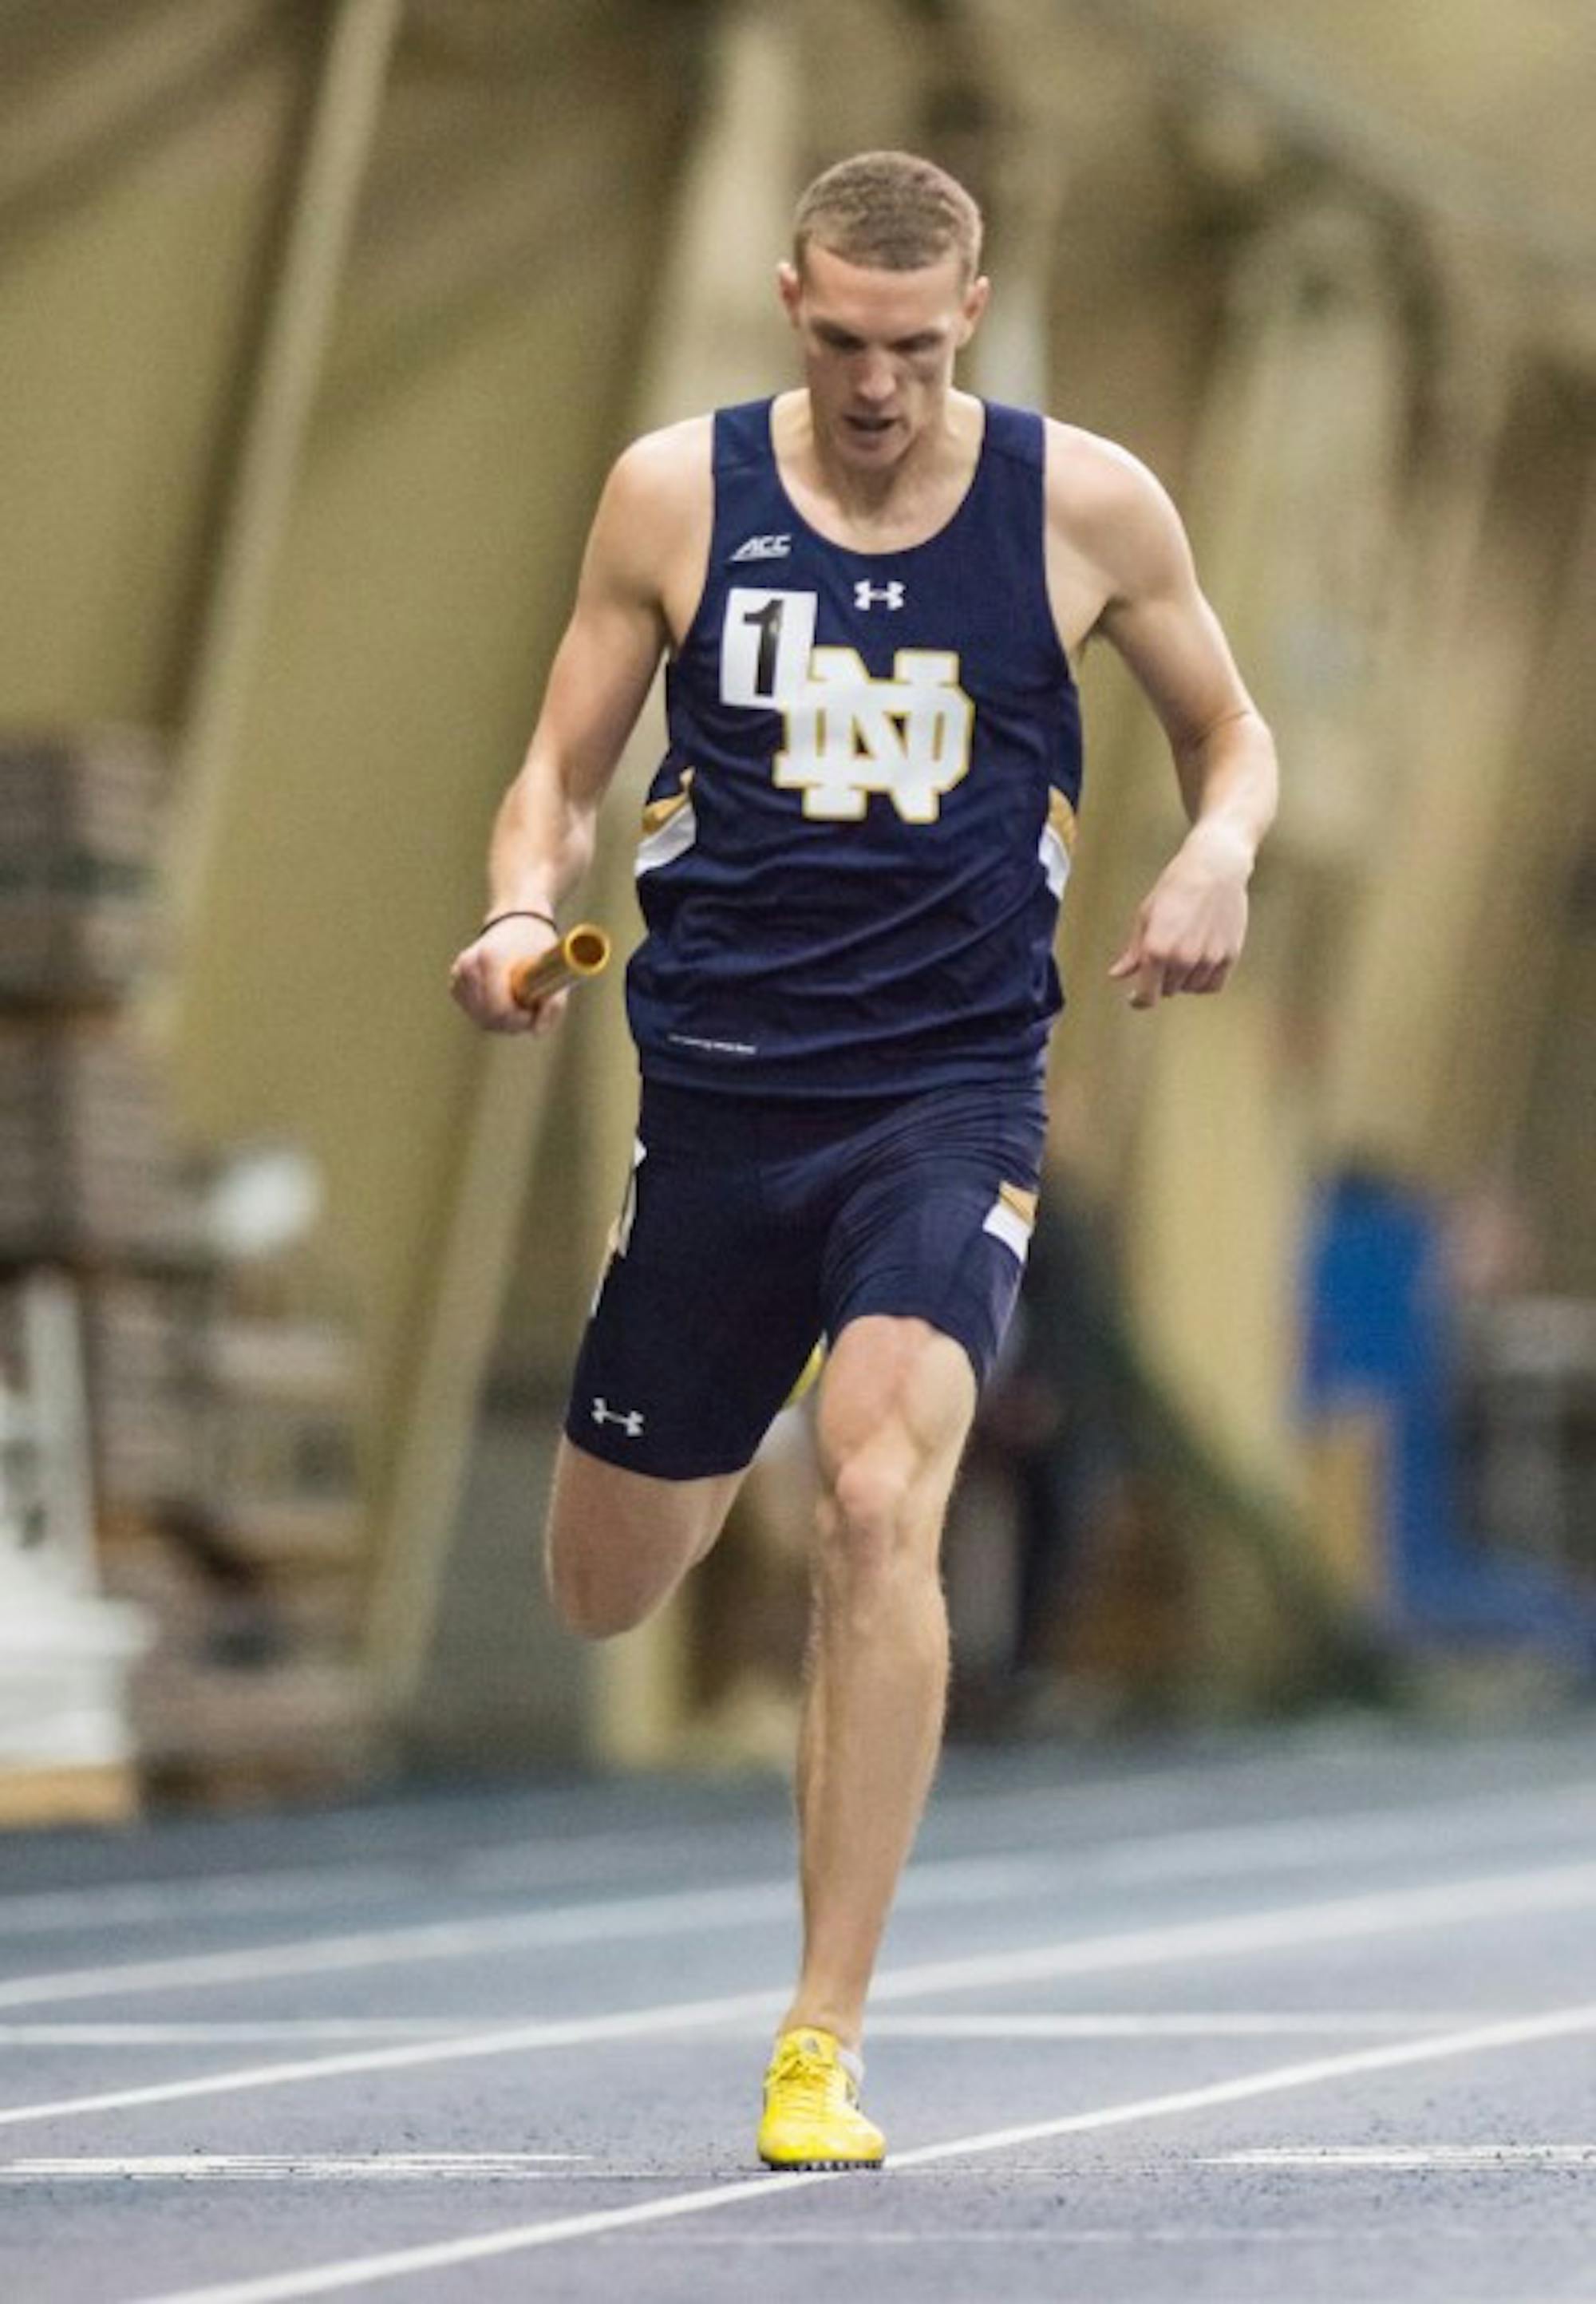 Volunteer track coach and former Irish sprinter Chris Giesting runs in the Notre Dame Invitational at Meyo Field on Jan. 24, 2015. Geisting is attempting to qualify for the 2016 Olympics in Rio de Janeiro.